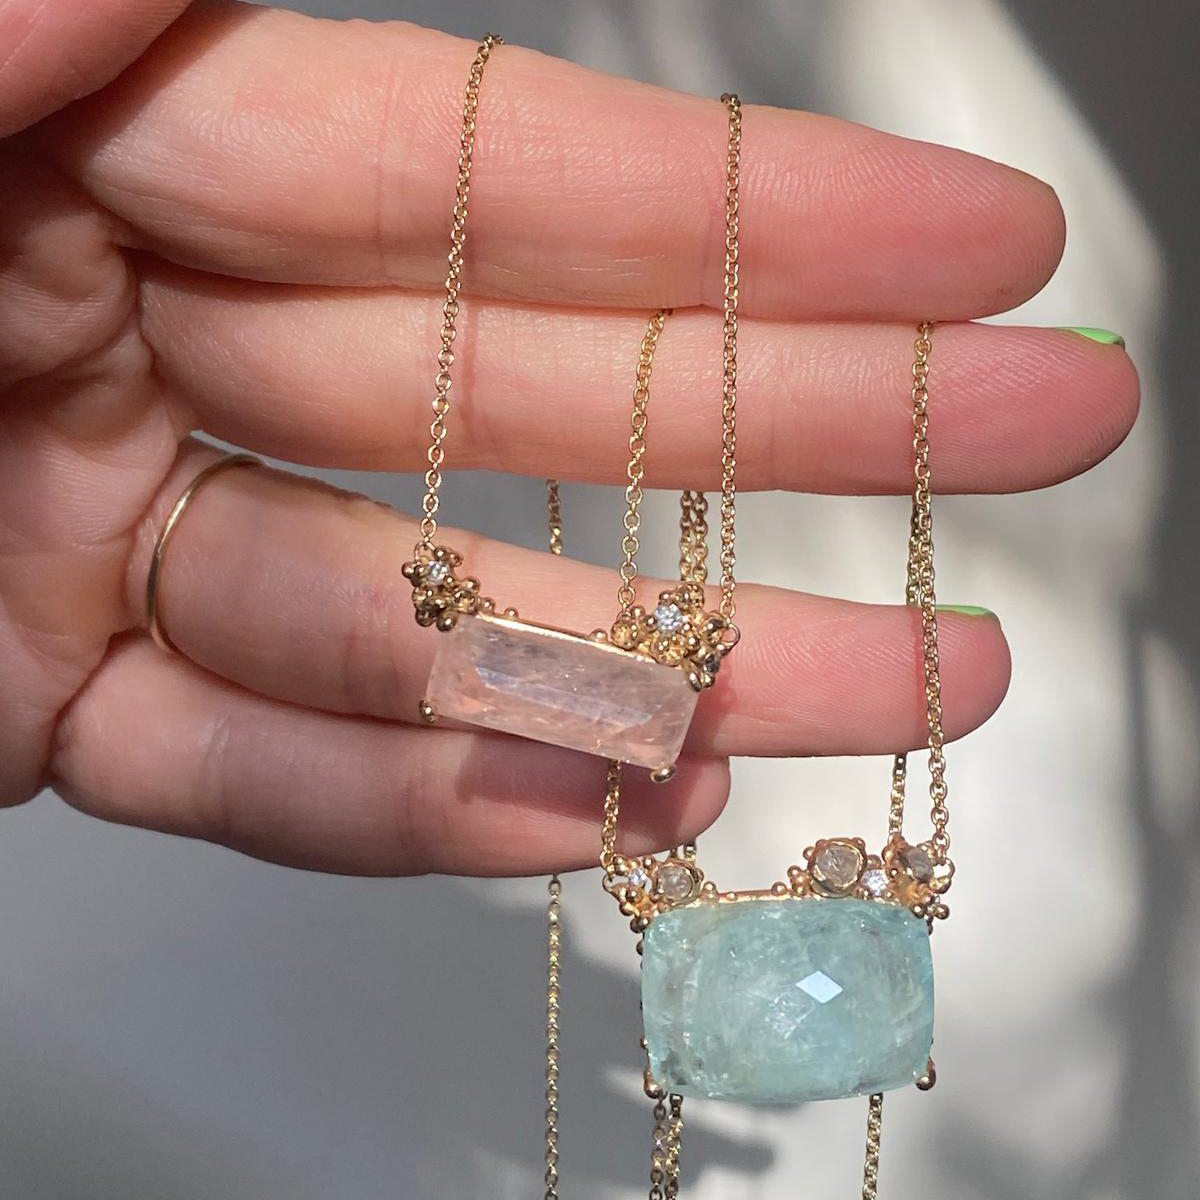 TOMFOOLERY EXCLUSIVE ONE OF A KIND AQUAMARINE AND DIAMOND NECKLACE By Ruth Tomlinson